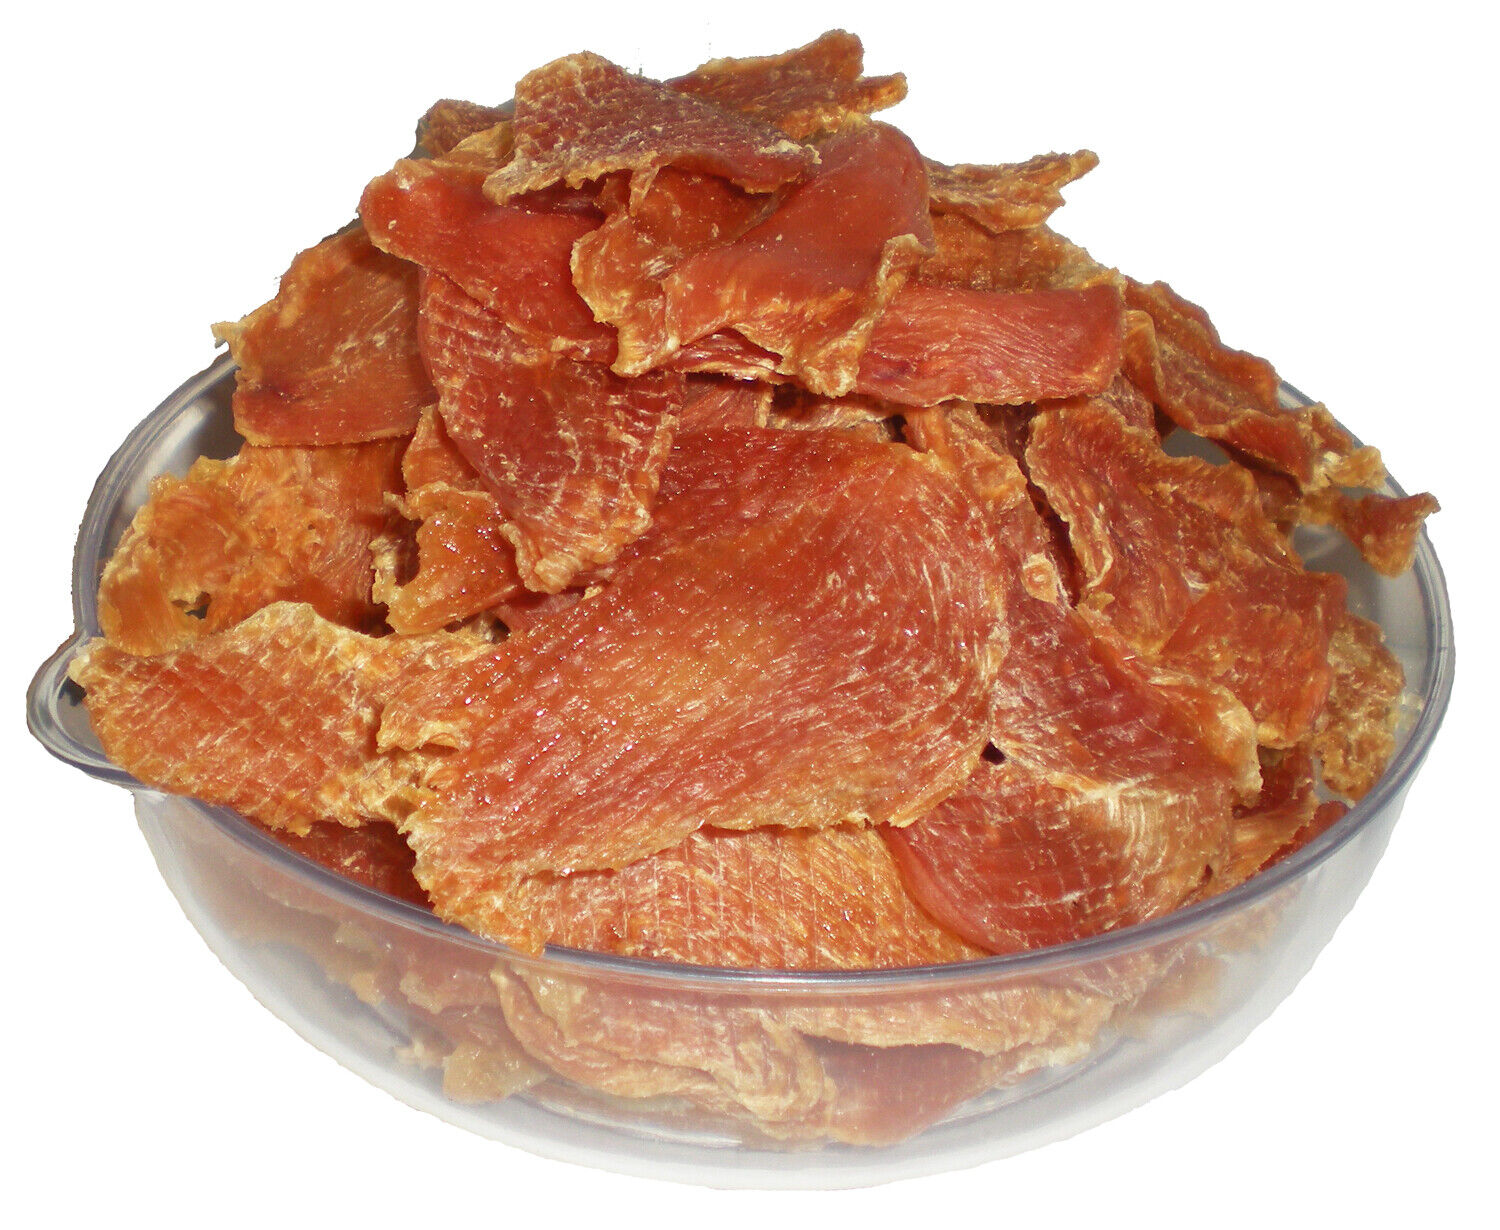 2 Pounds of Chicken Jerky Dog Treats Made In USA 100% Chicken Breast All NATURAL